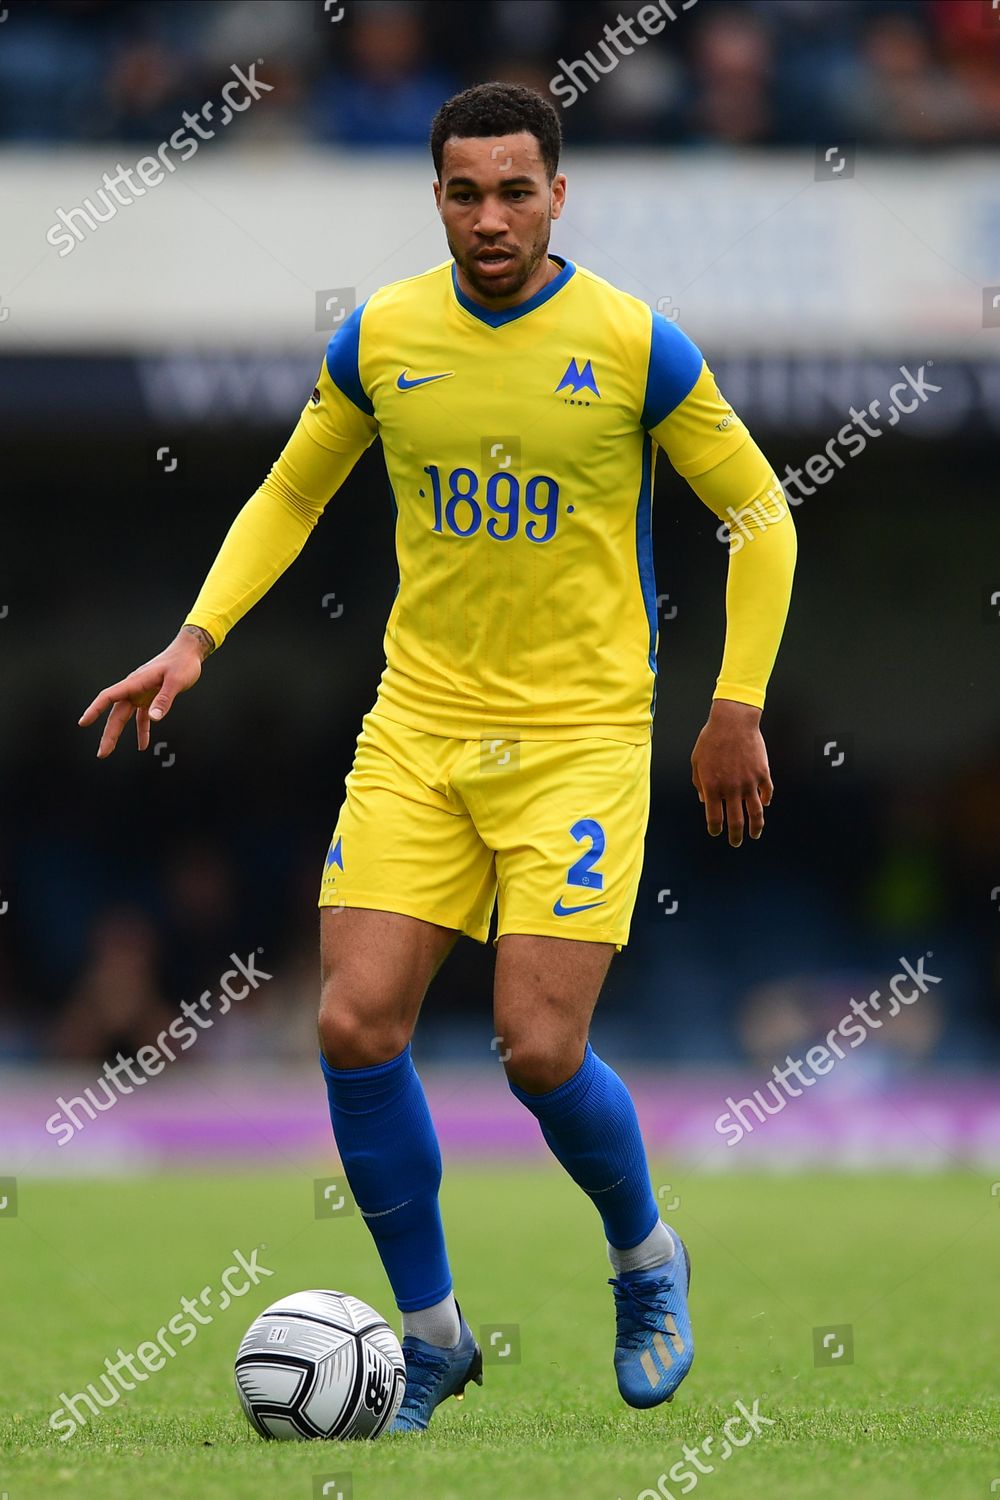 Ben Wynter Torquay United Possession During Editorial Stock Photo ...